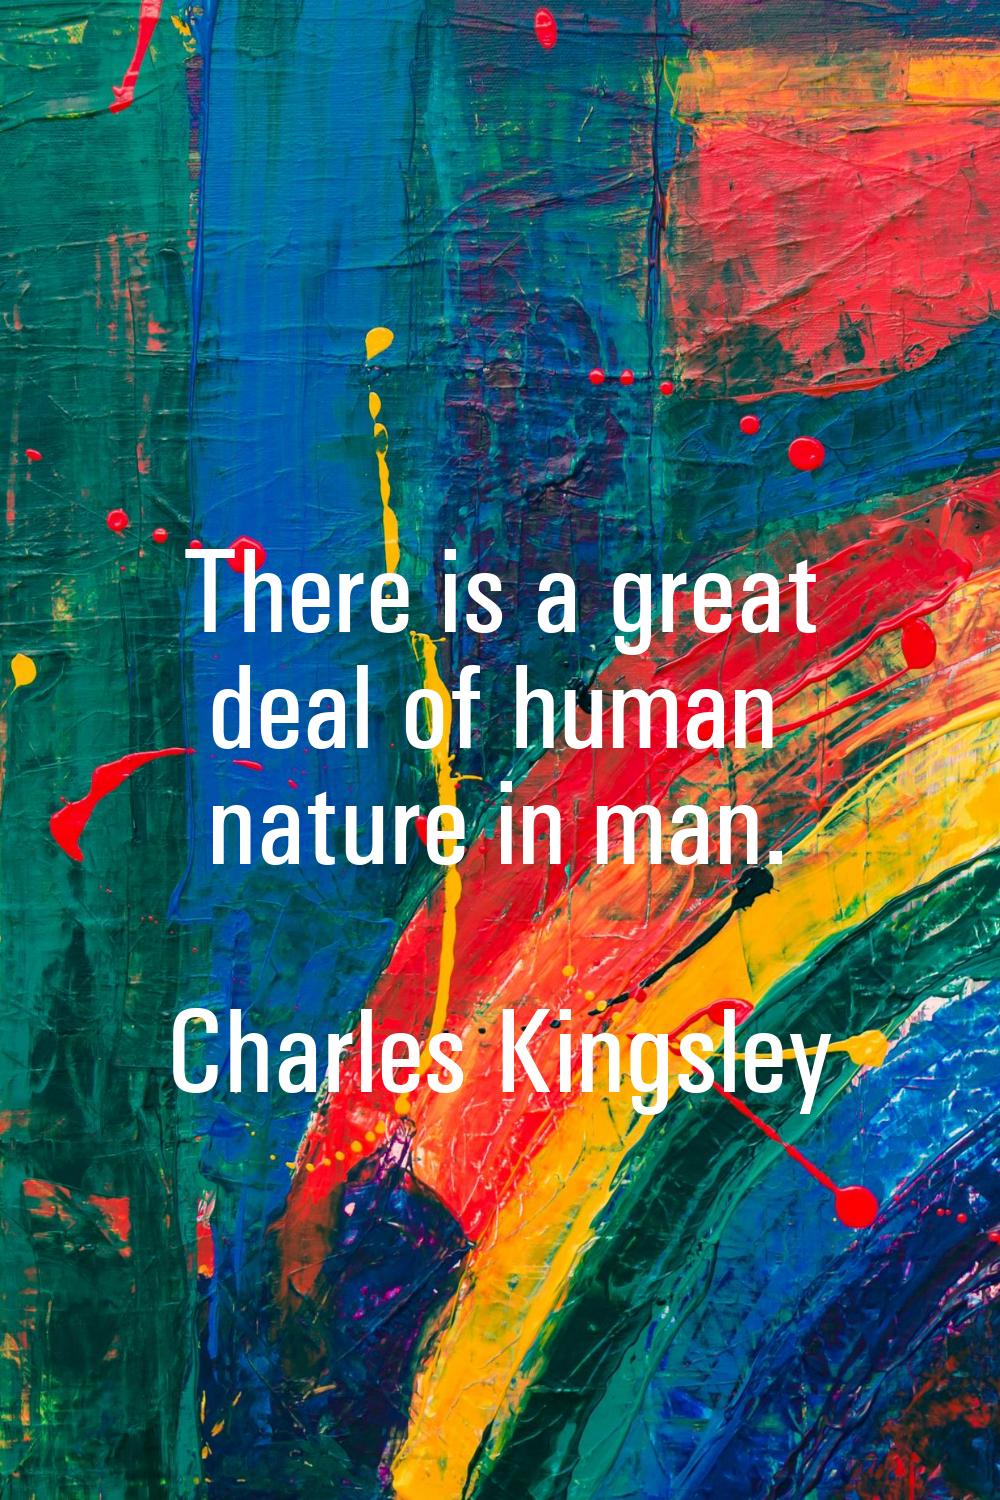 There is a great deal of human nature in man.